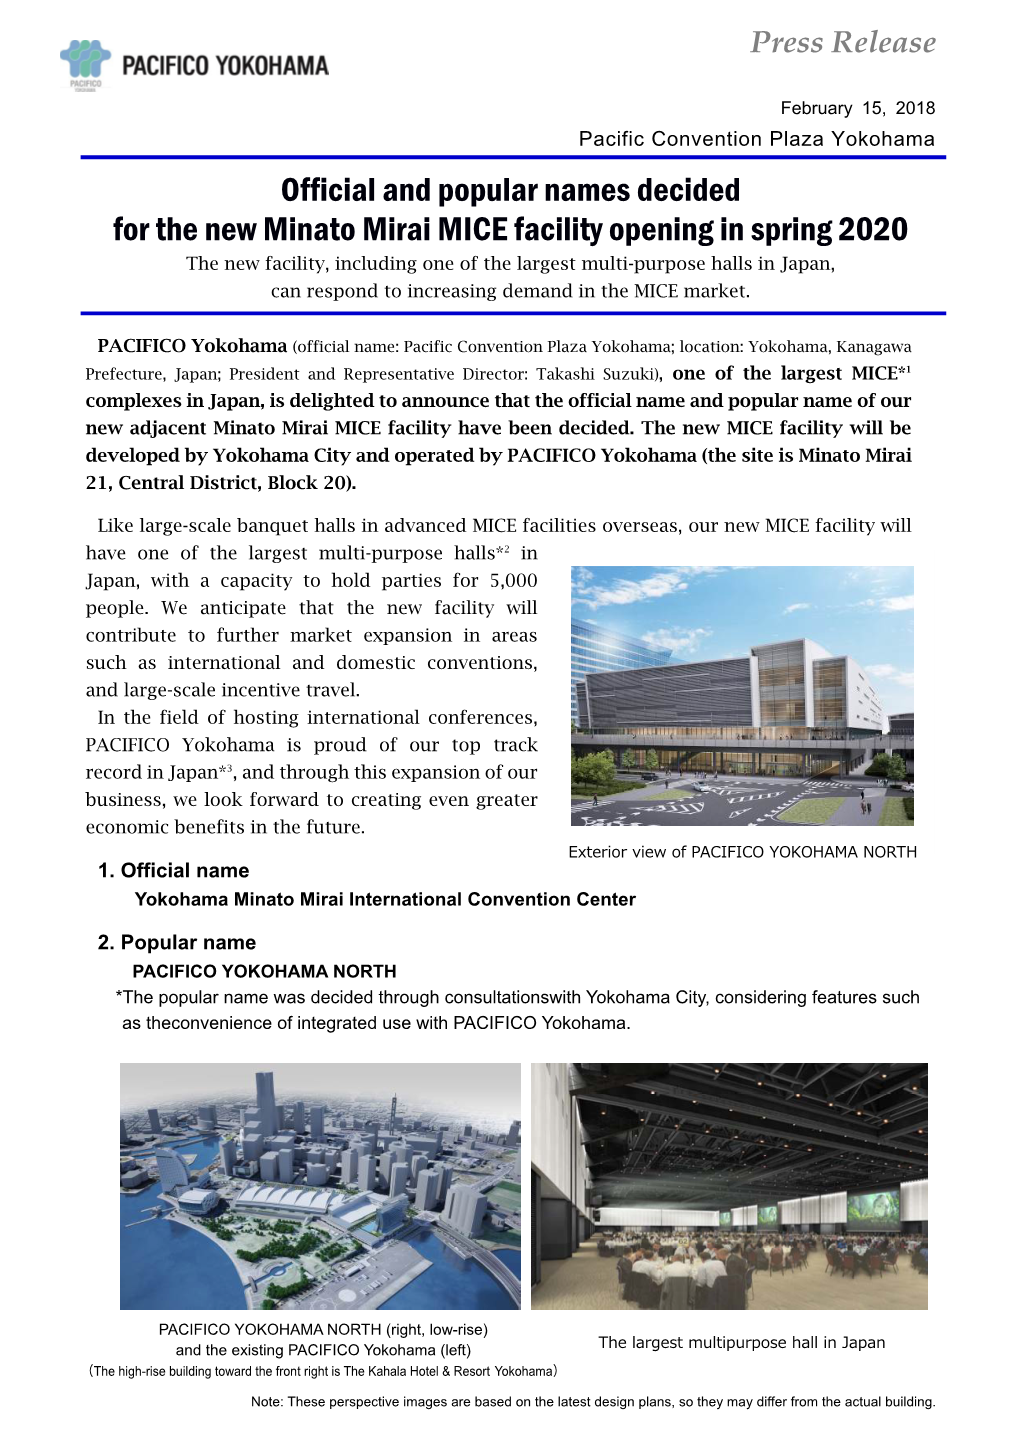 Official and Popular Names Decided for the New Minato Mirai MICE Facility Opening in Spring 2020